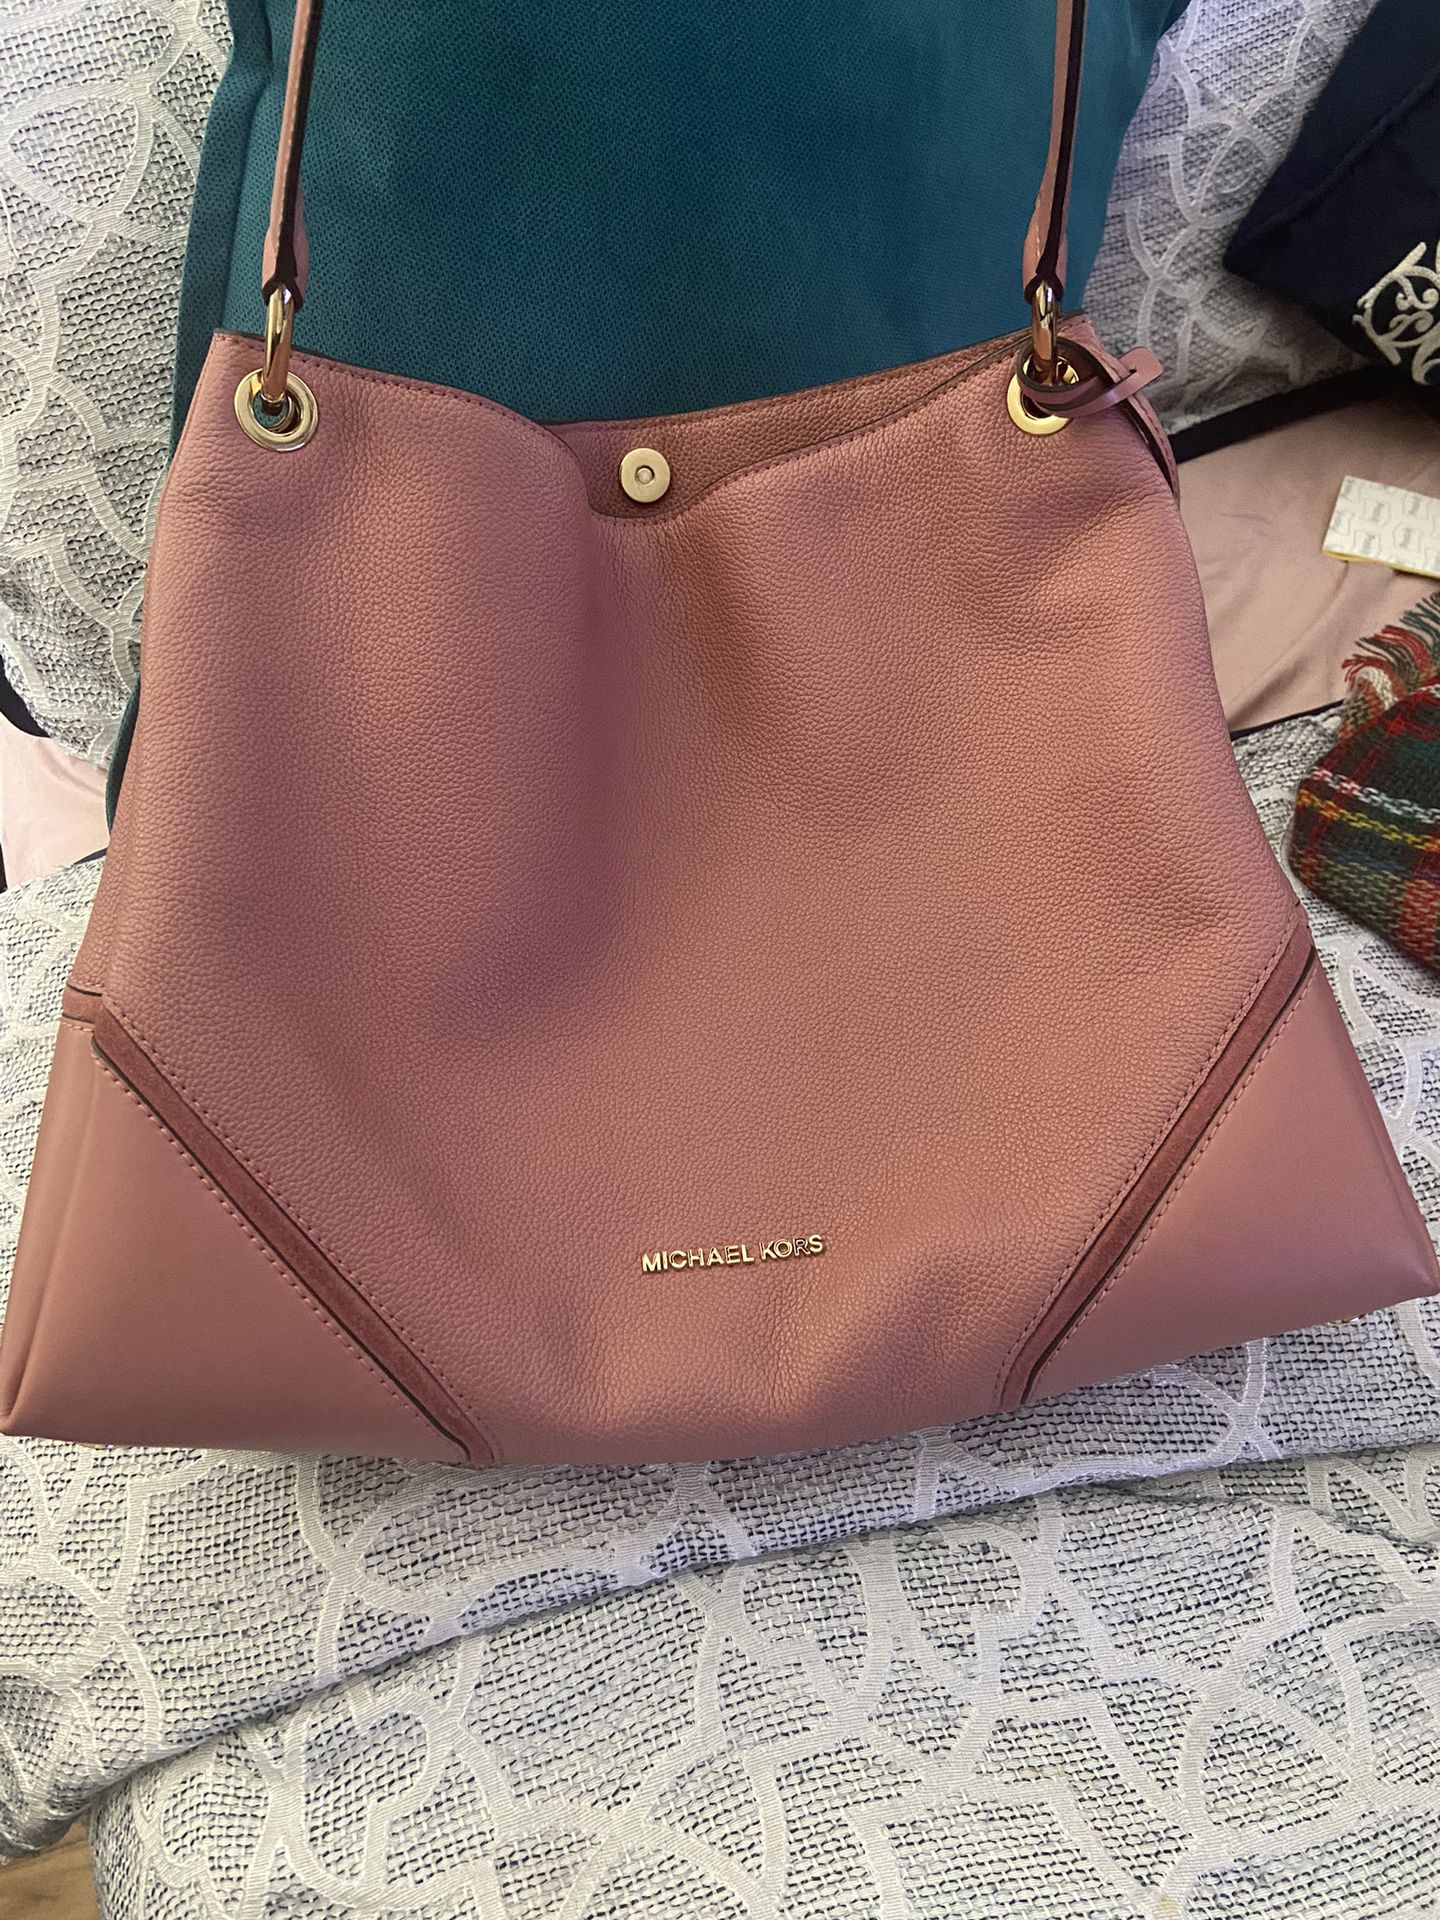 Michael Kors. Soft Pink In Color Fairly Large Purse